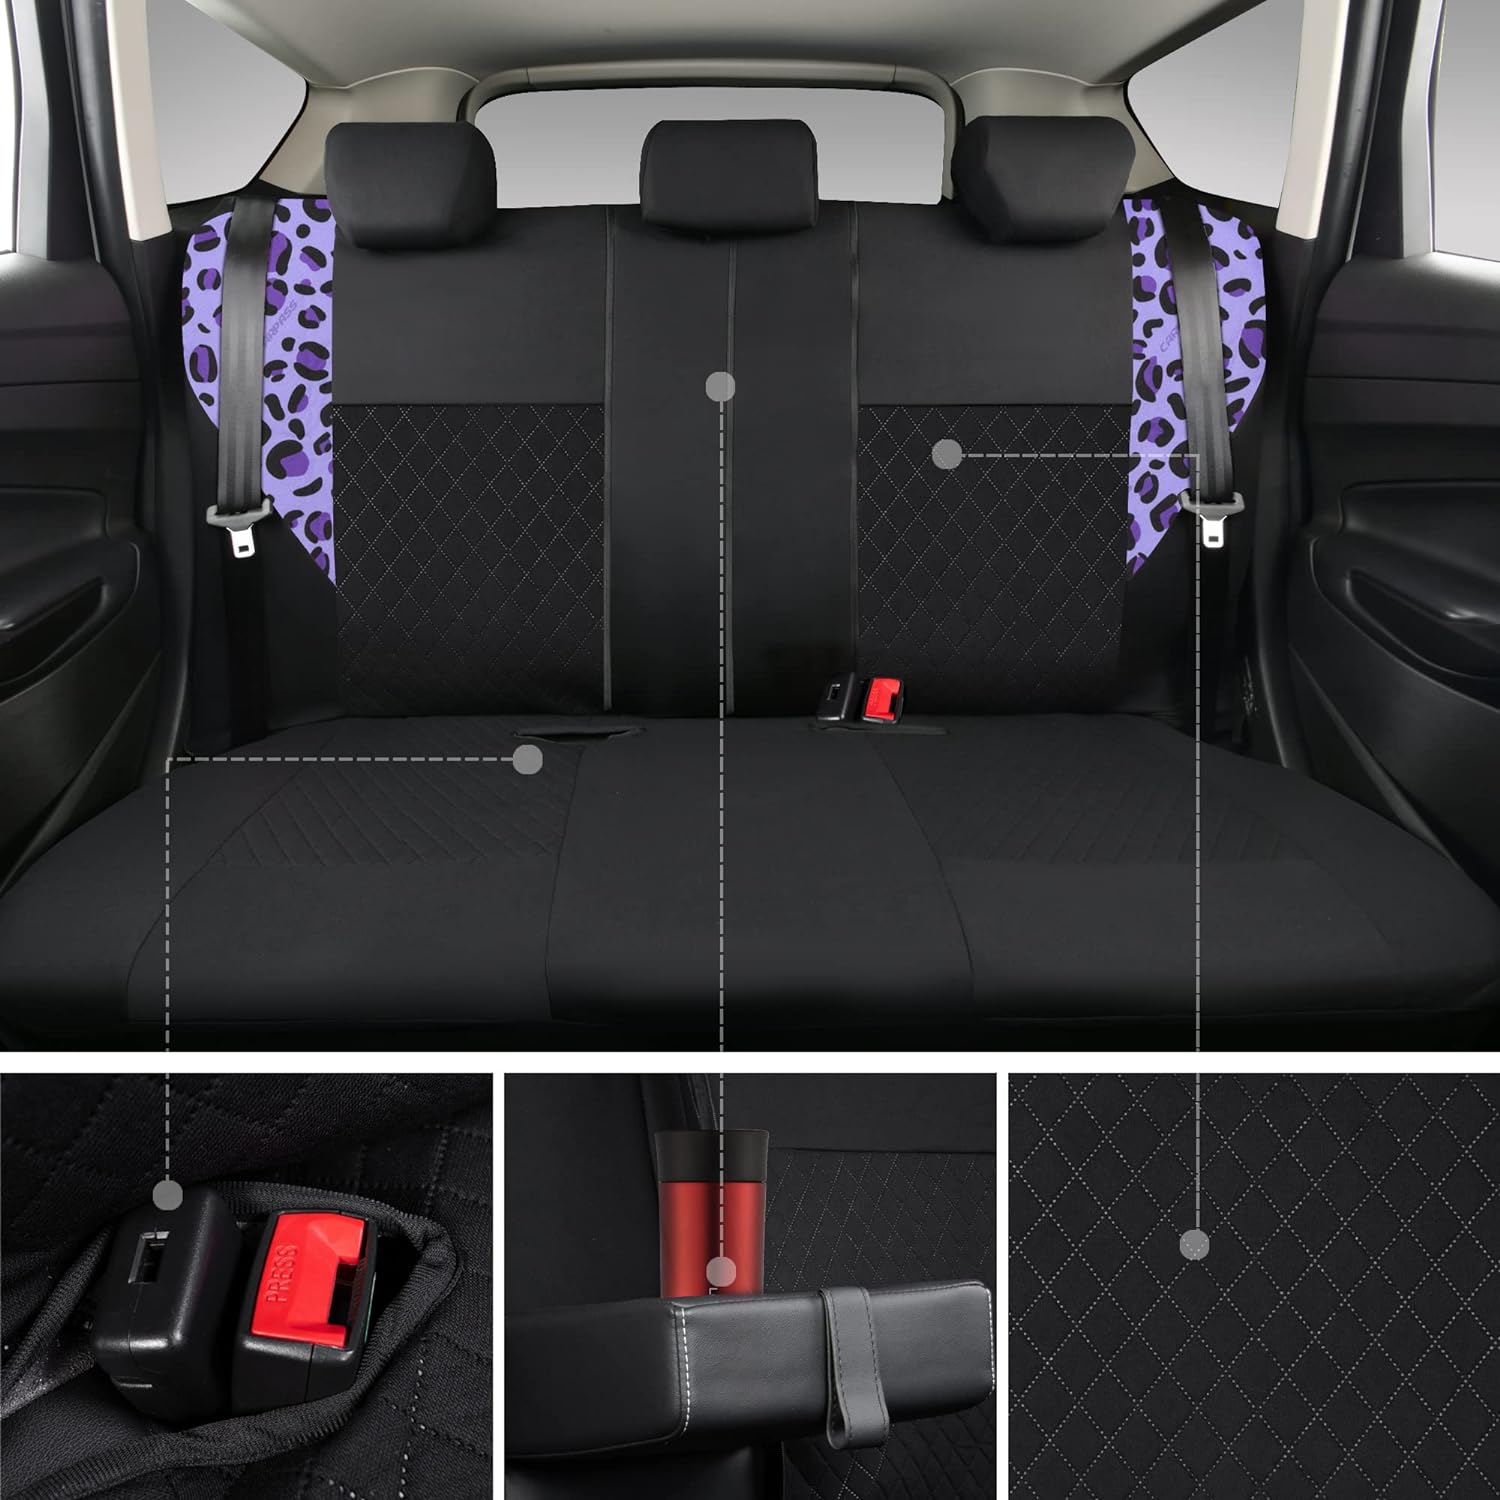 CAR PASS Ultrasonic Embossing Cloth Universal seat Covers-Breathable car seat Cover with 5mm Composite Sponge Inside,Airbag Compatible,2zipper Bench for Sedan,SUV,Truck(Black and Red,Full Set)